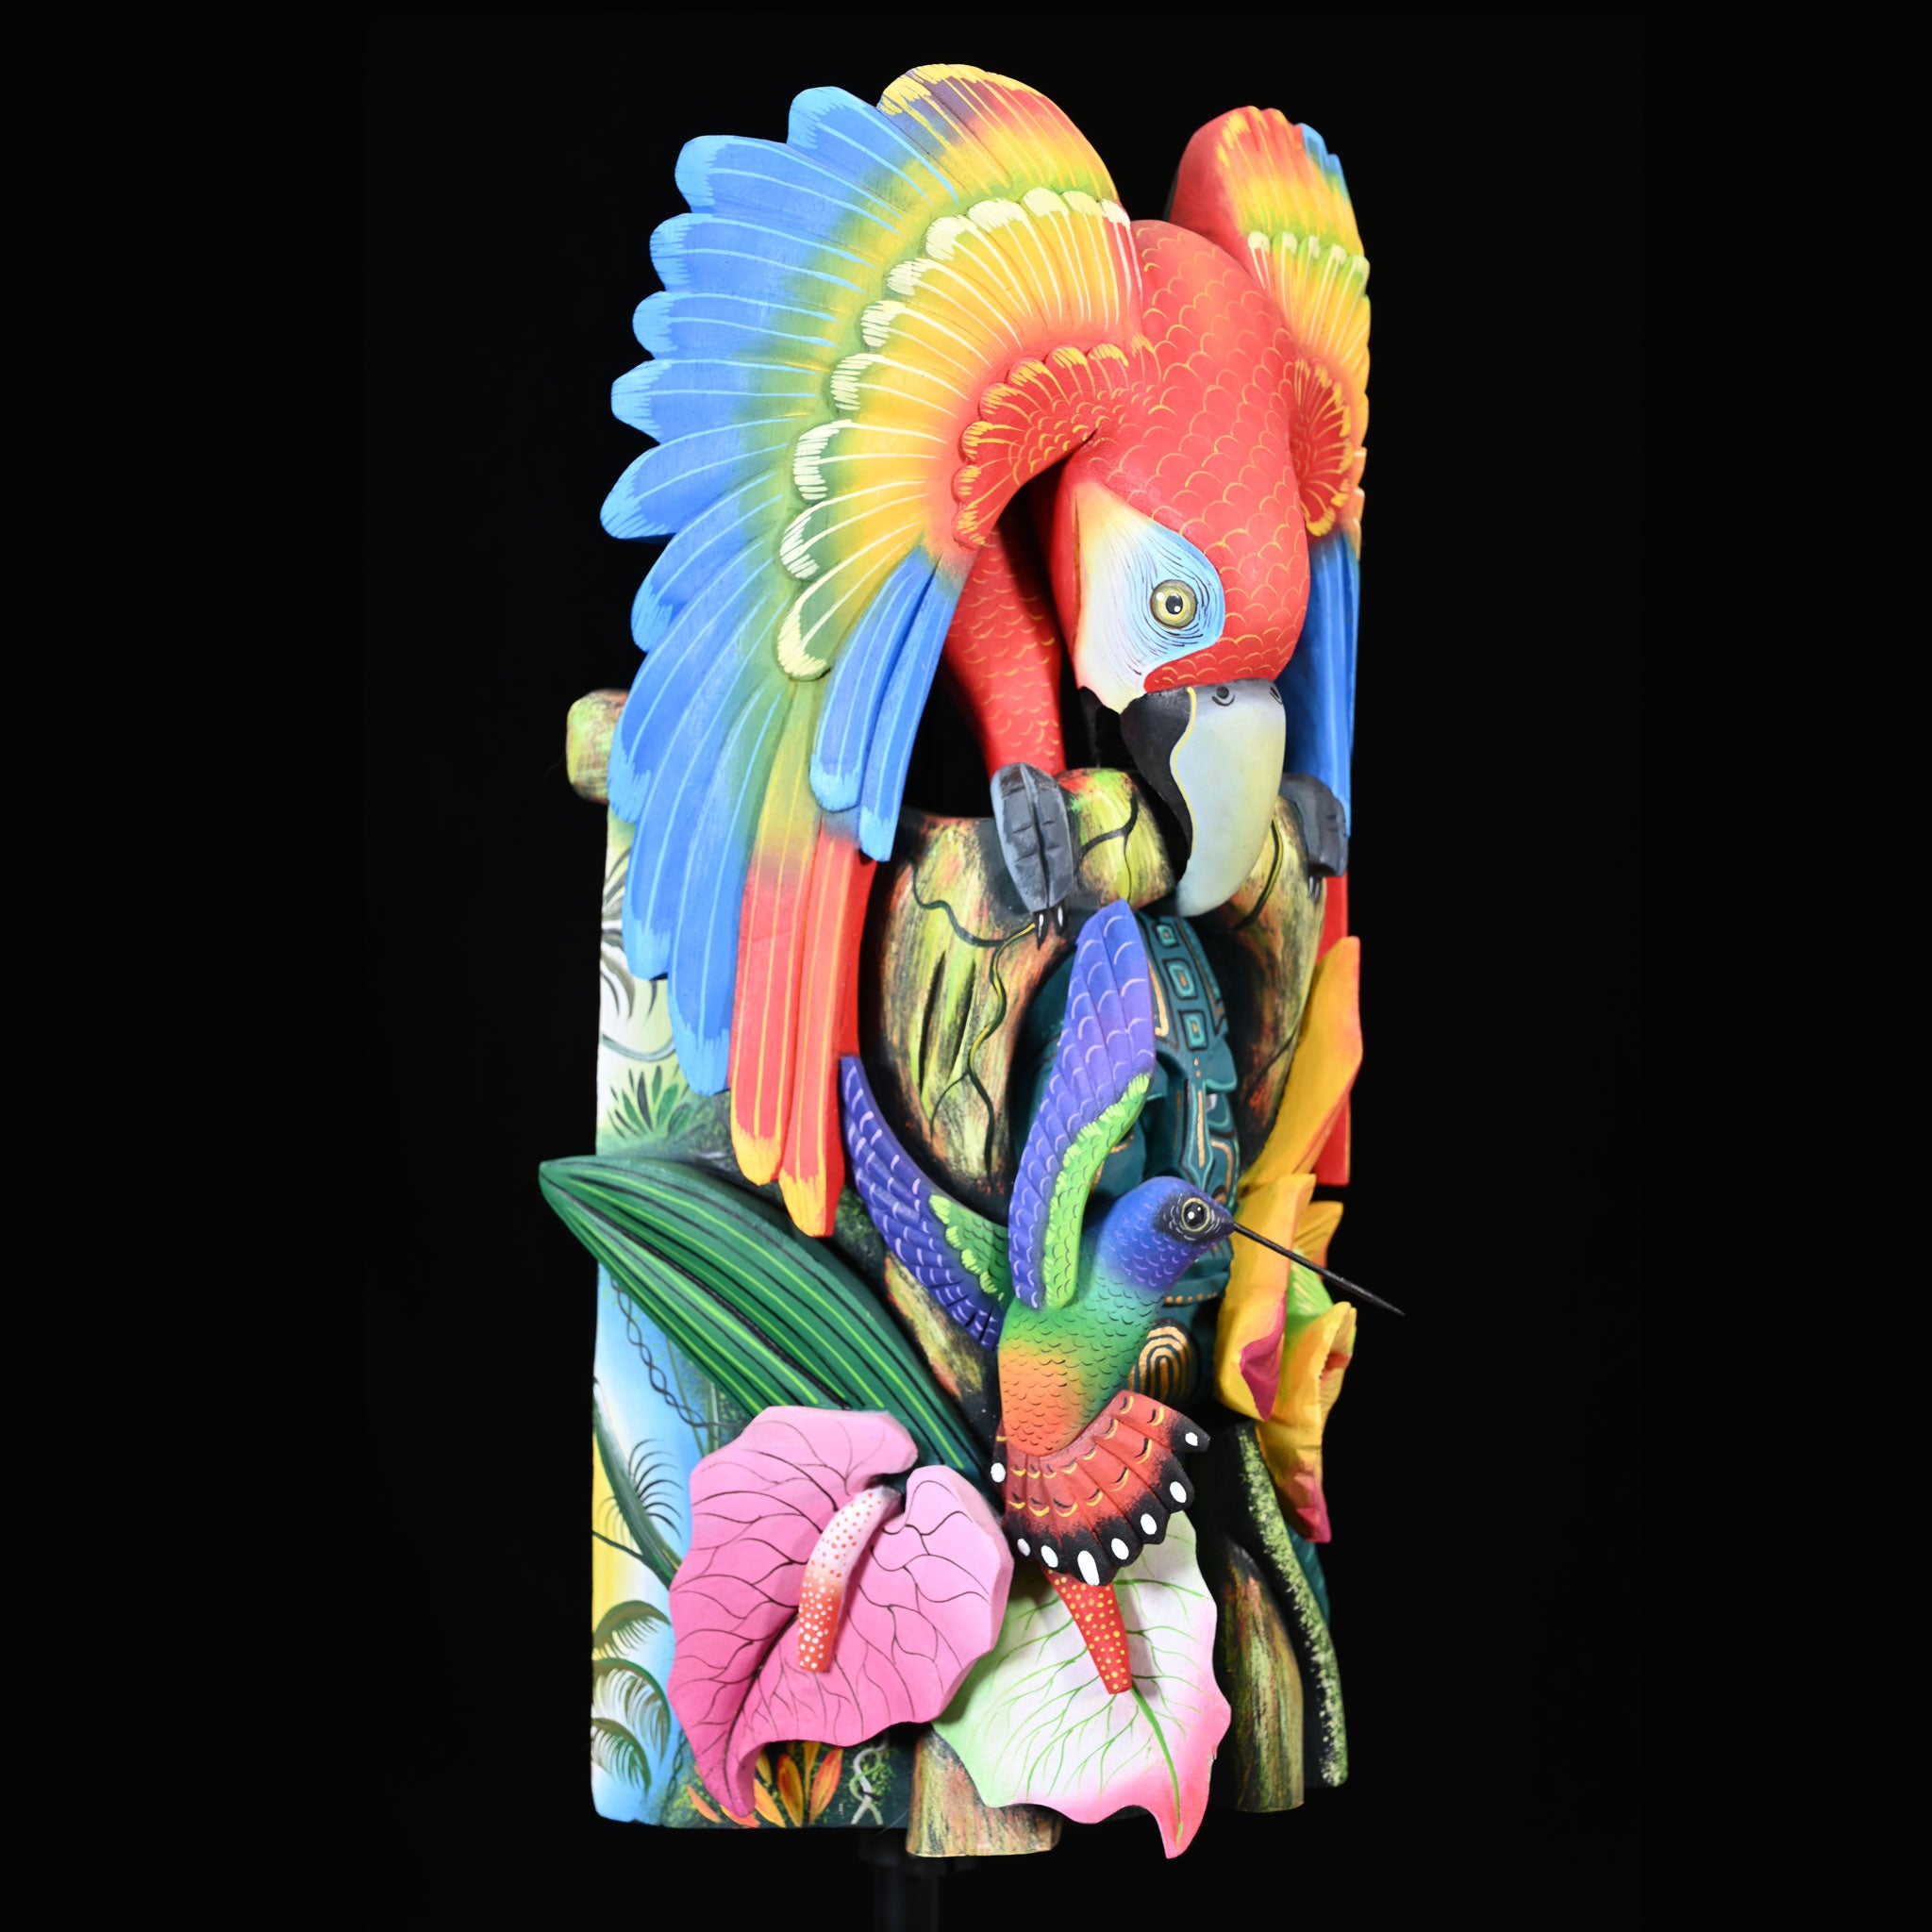 "Crowning Glory" by Marcos Rojas Morales and Esteban Morales Lazaro; Balsa Wood Mask or Totem from Boruca, CR with size 18"